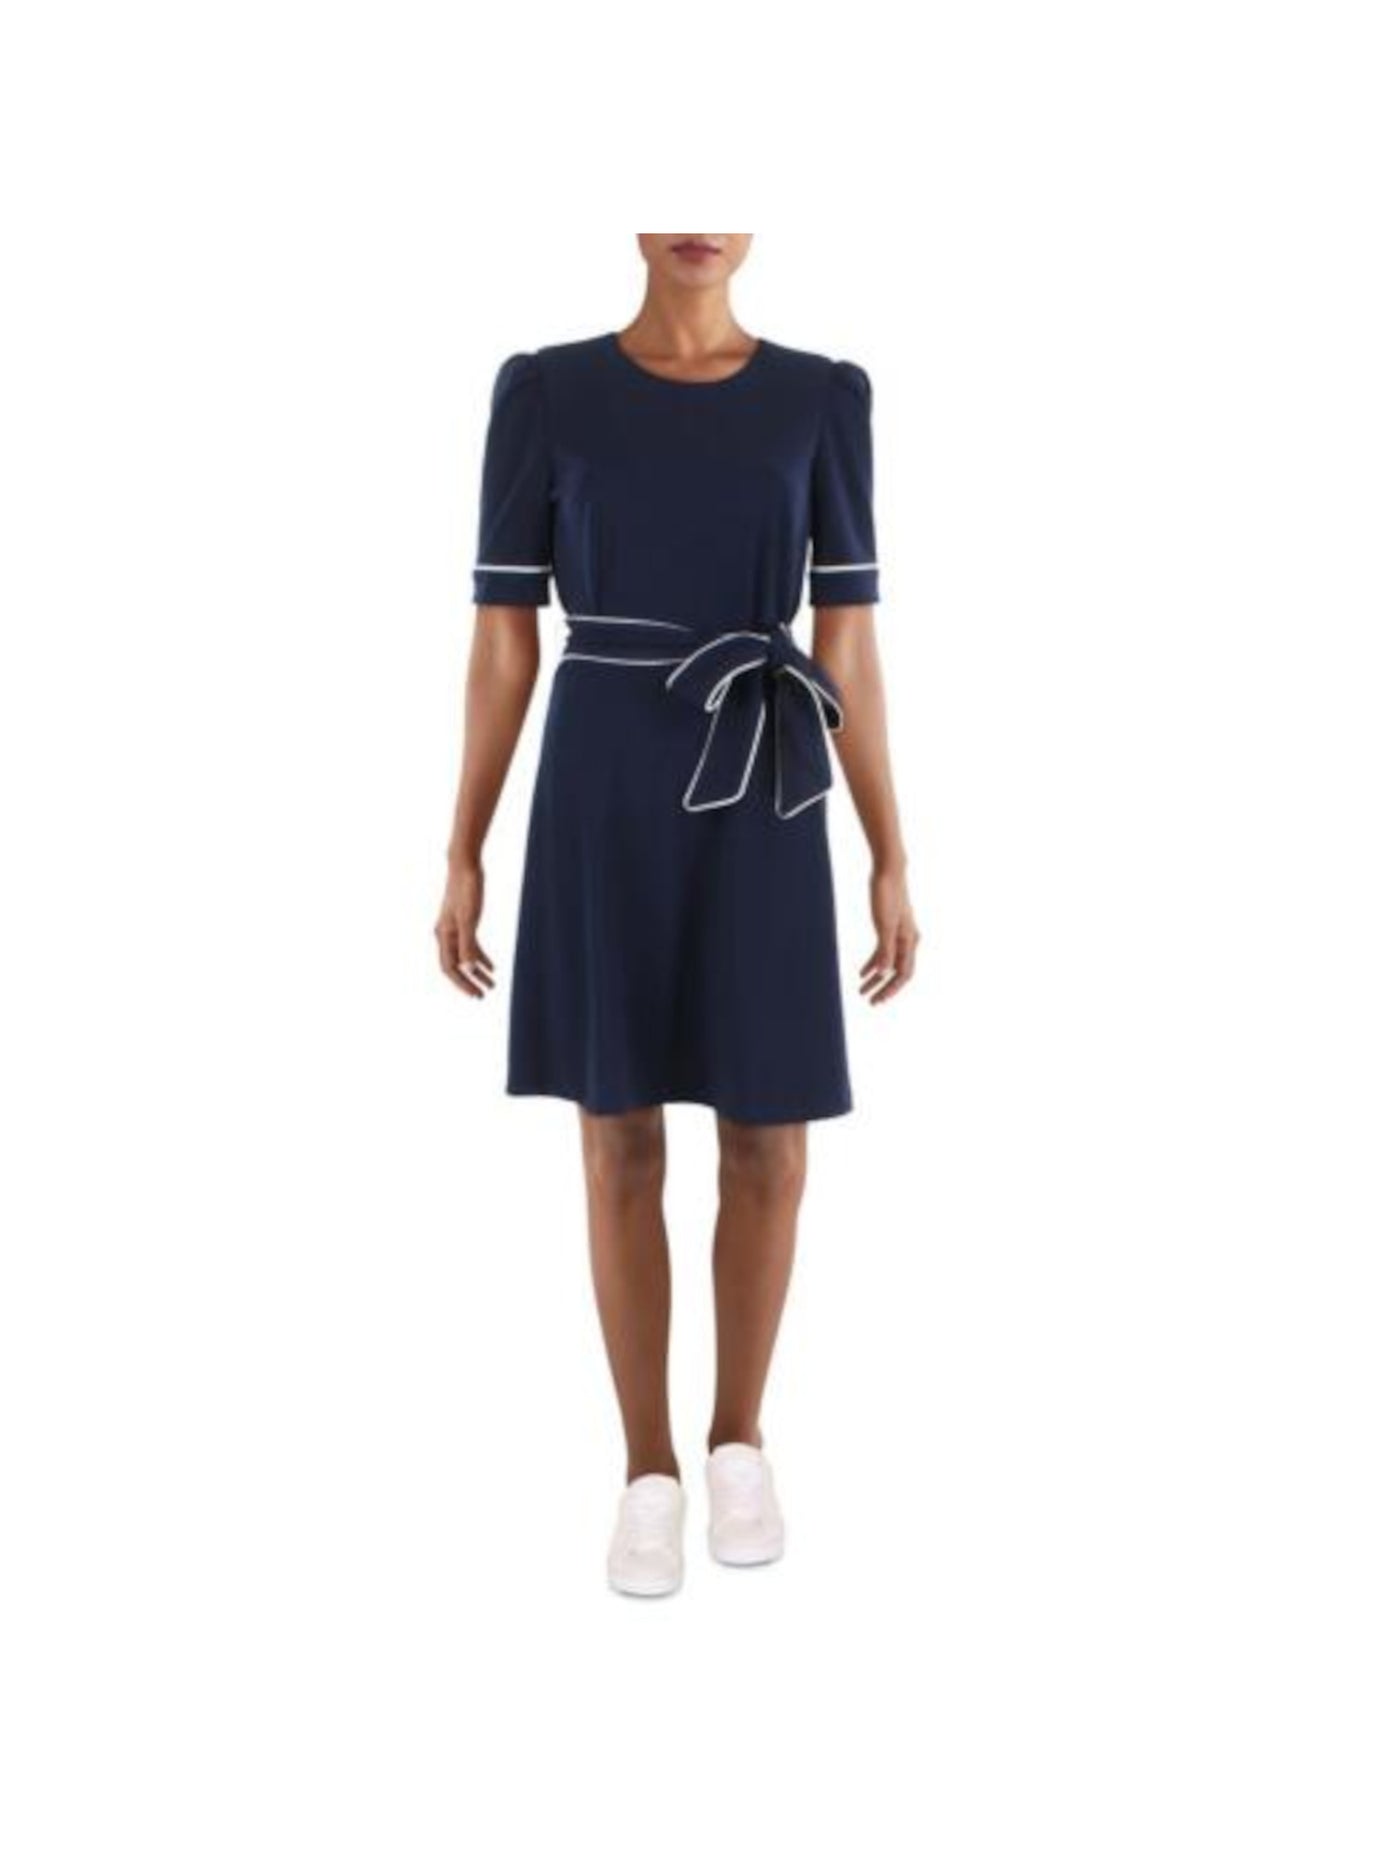 DKNY Womens Navy Zippered Belted Lined Piped Elbow Sleeve Crew Neck Above The Knee Wear To Work Fit + Flare Dress 6